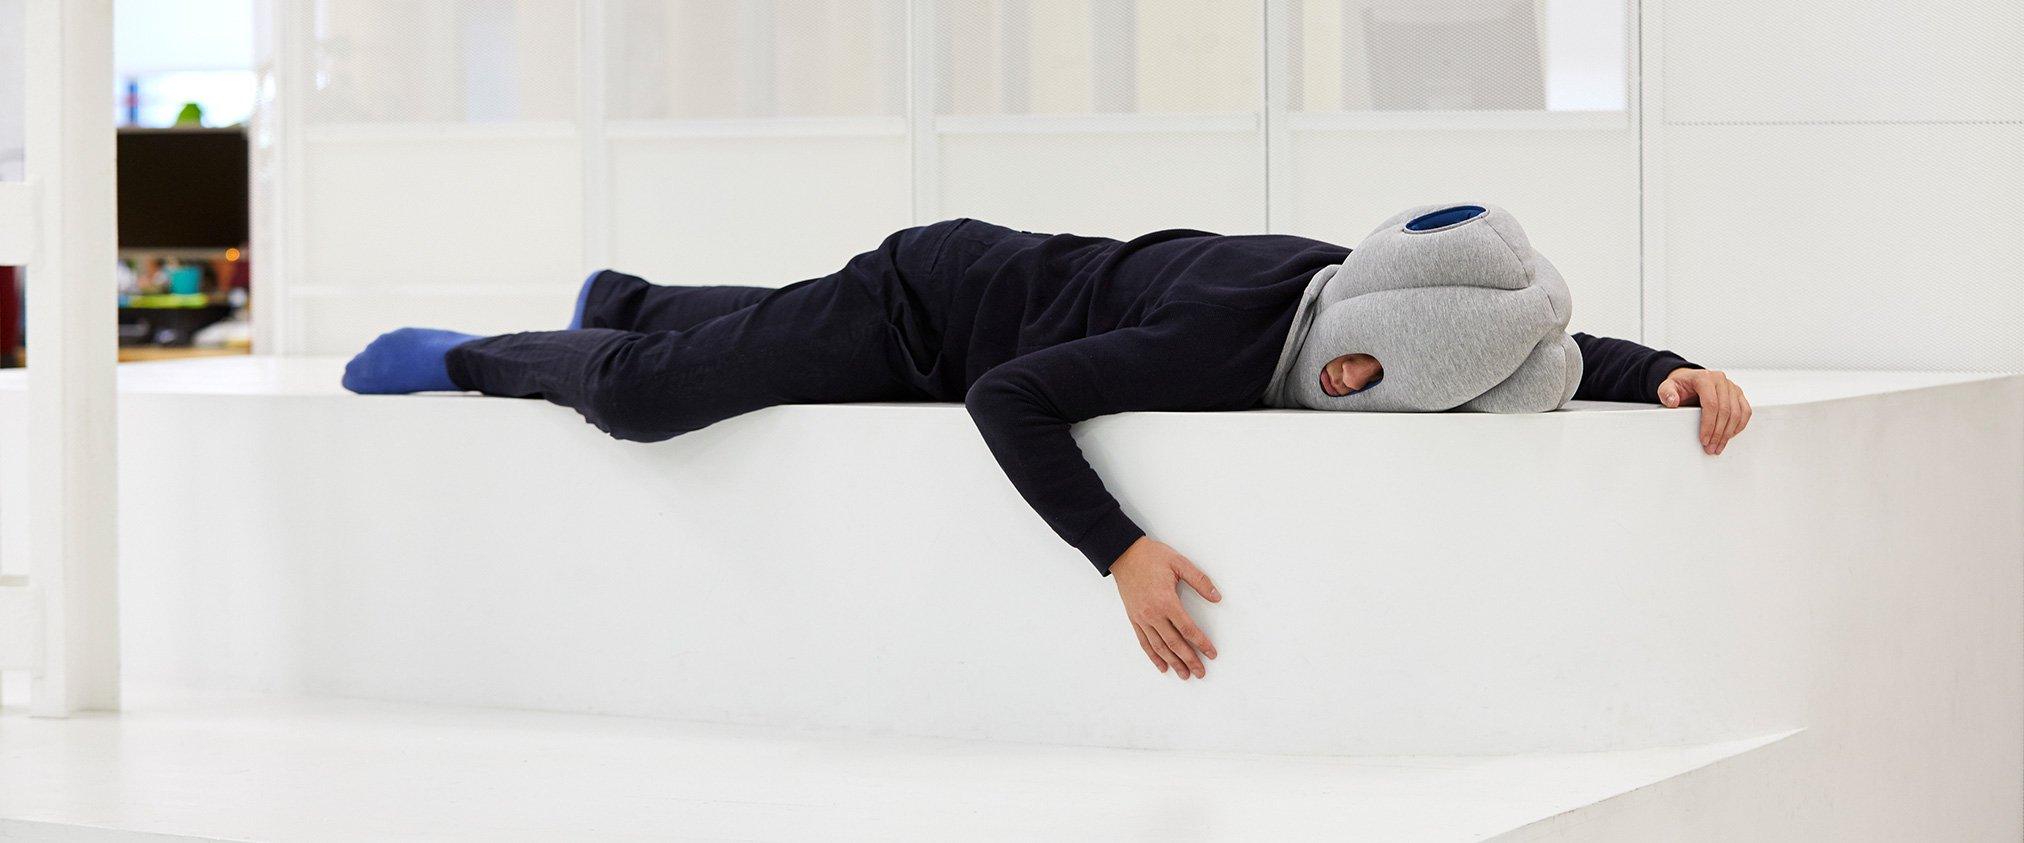 OSTRICHPILLOW® - Storming Gravity